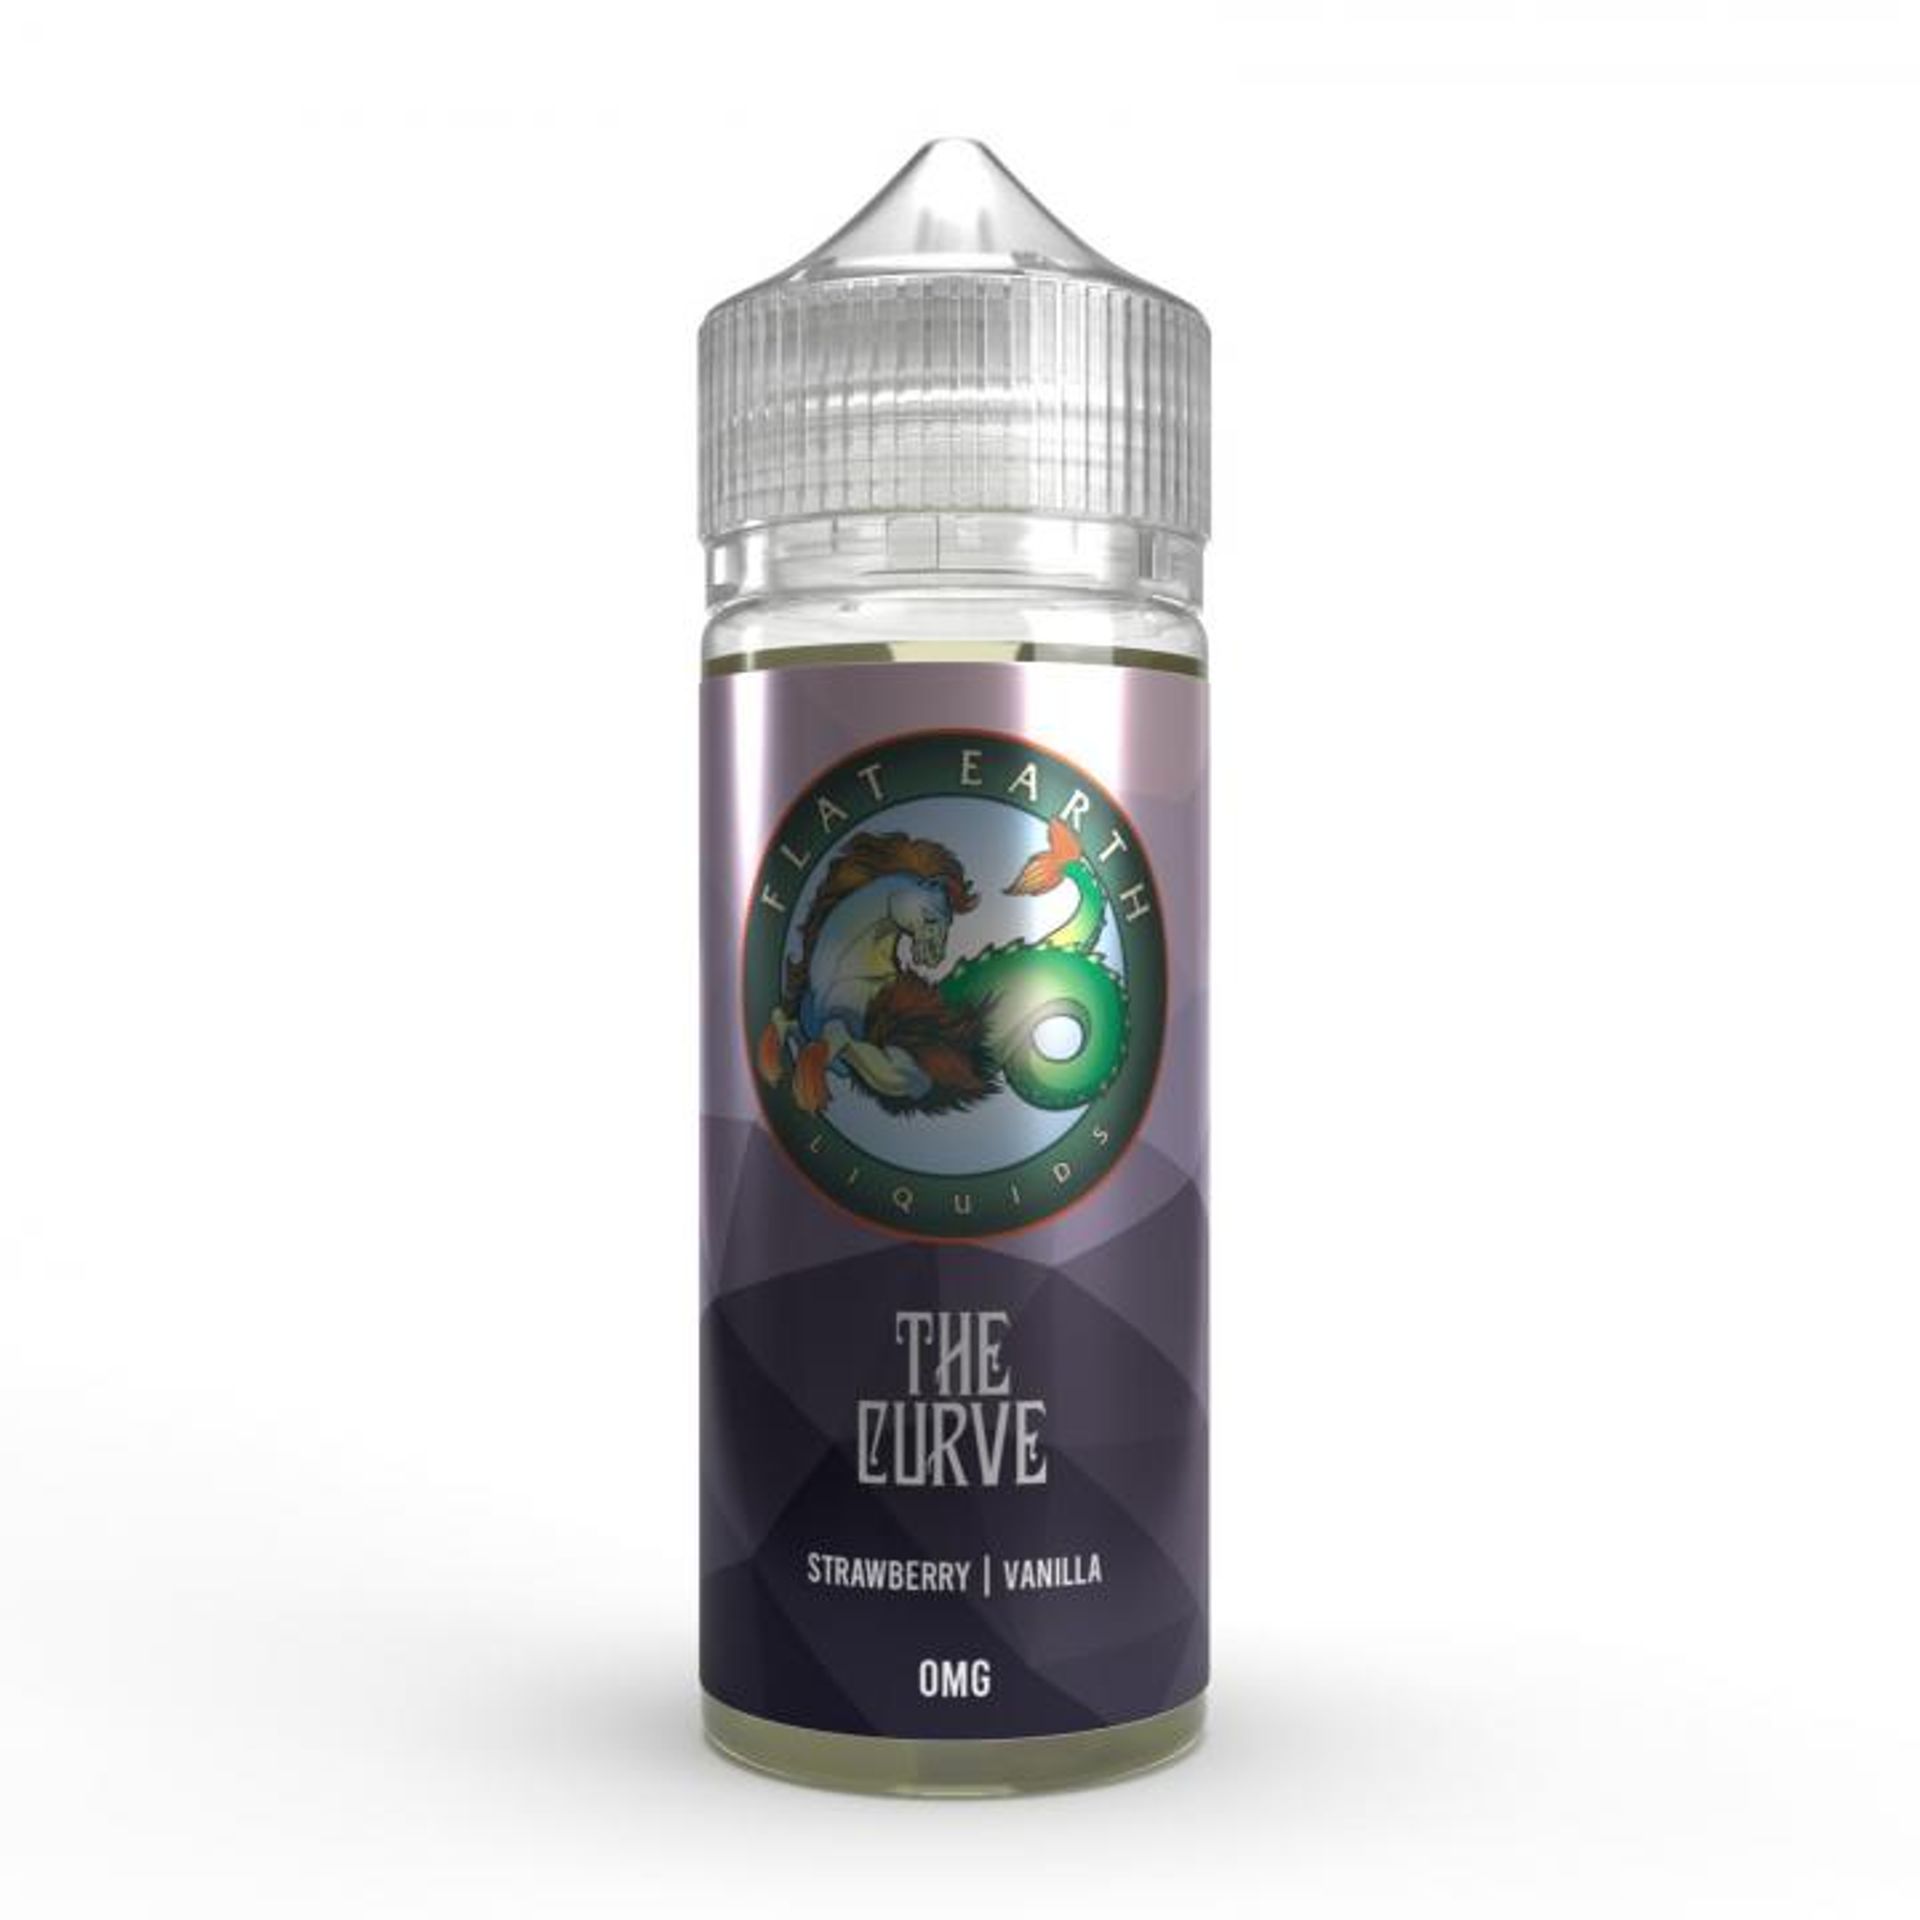 Image of The Curve by Flat Earth Liquids